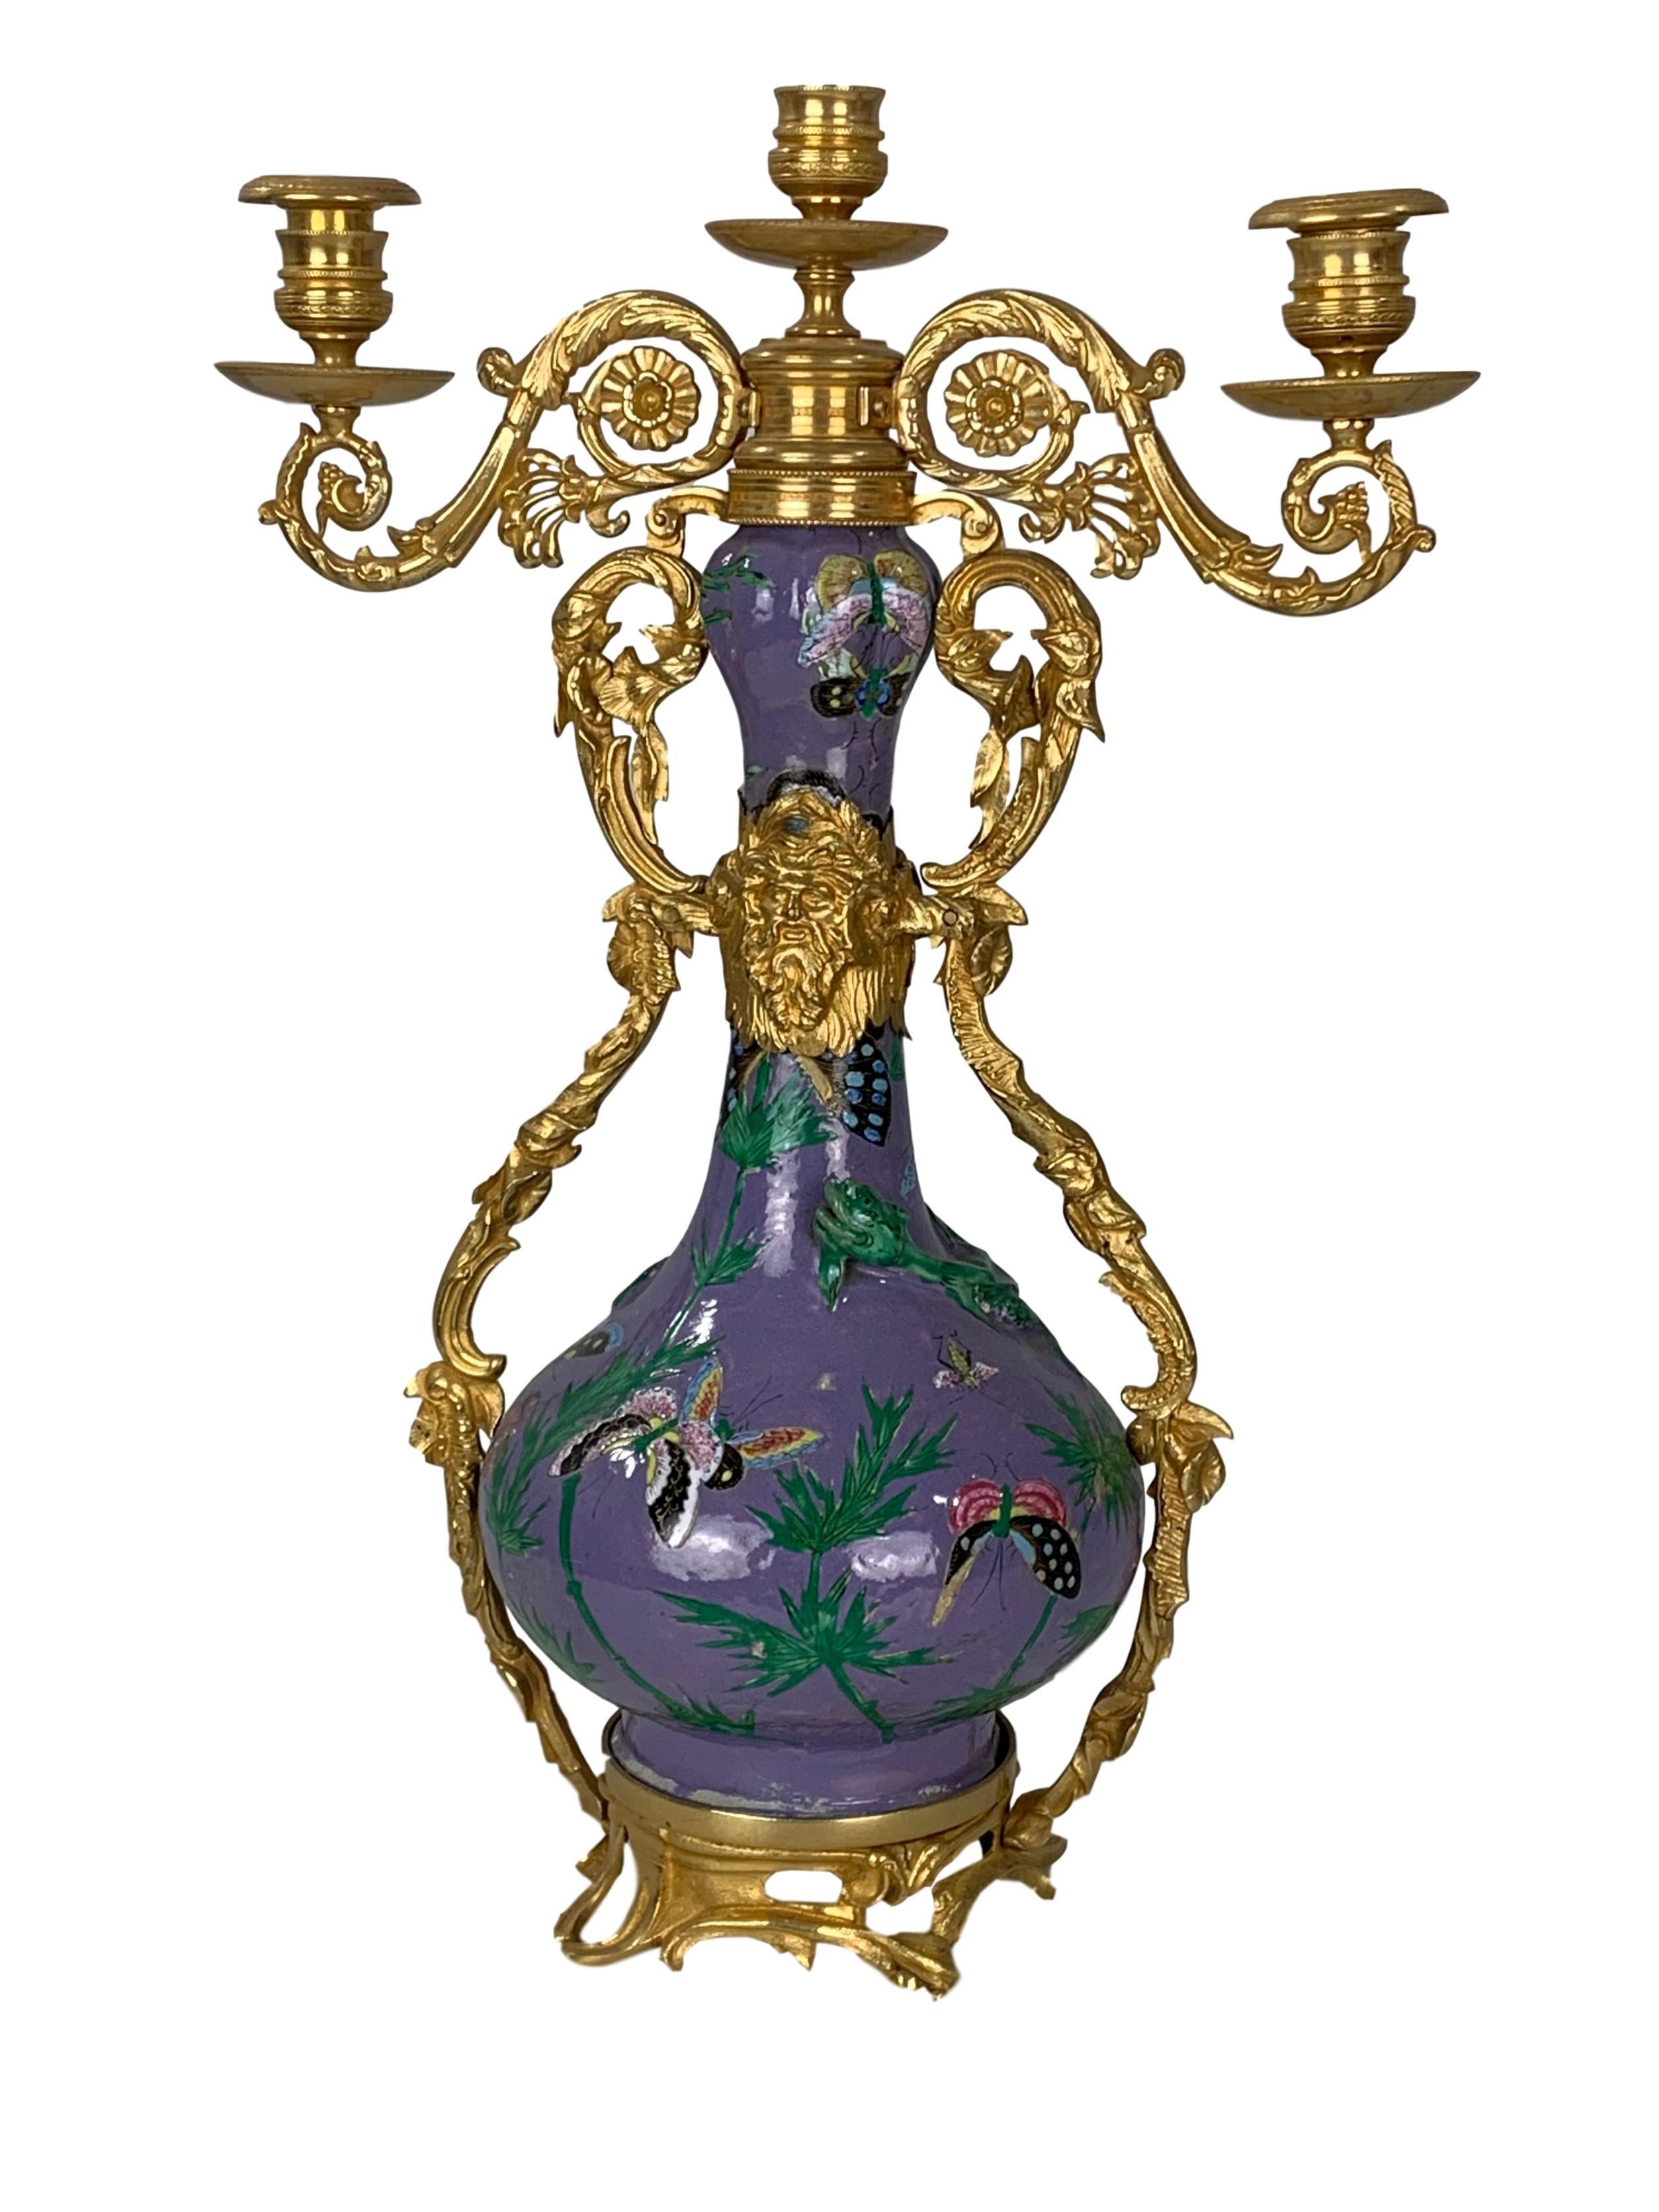 Pair of bronze ormolu-mounted Chinese export porcelain vases, Qing dynasty, early 20th century, the vases in famille rose enamels on a vibrant purple ground, with butterflies and lizards. Stunningly beautiful and highly decorative, the gilt bronze